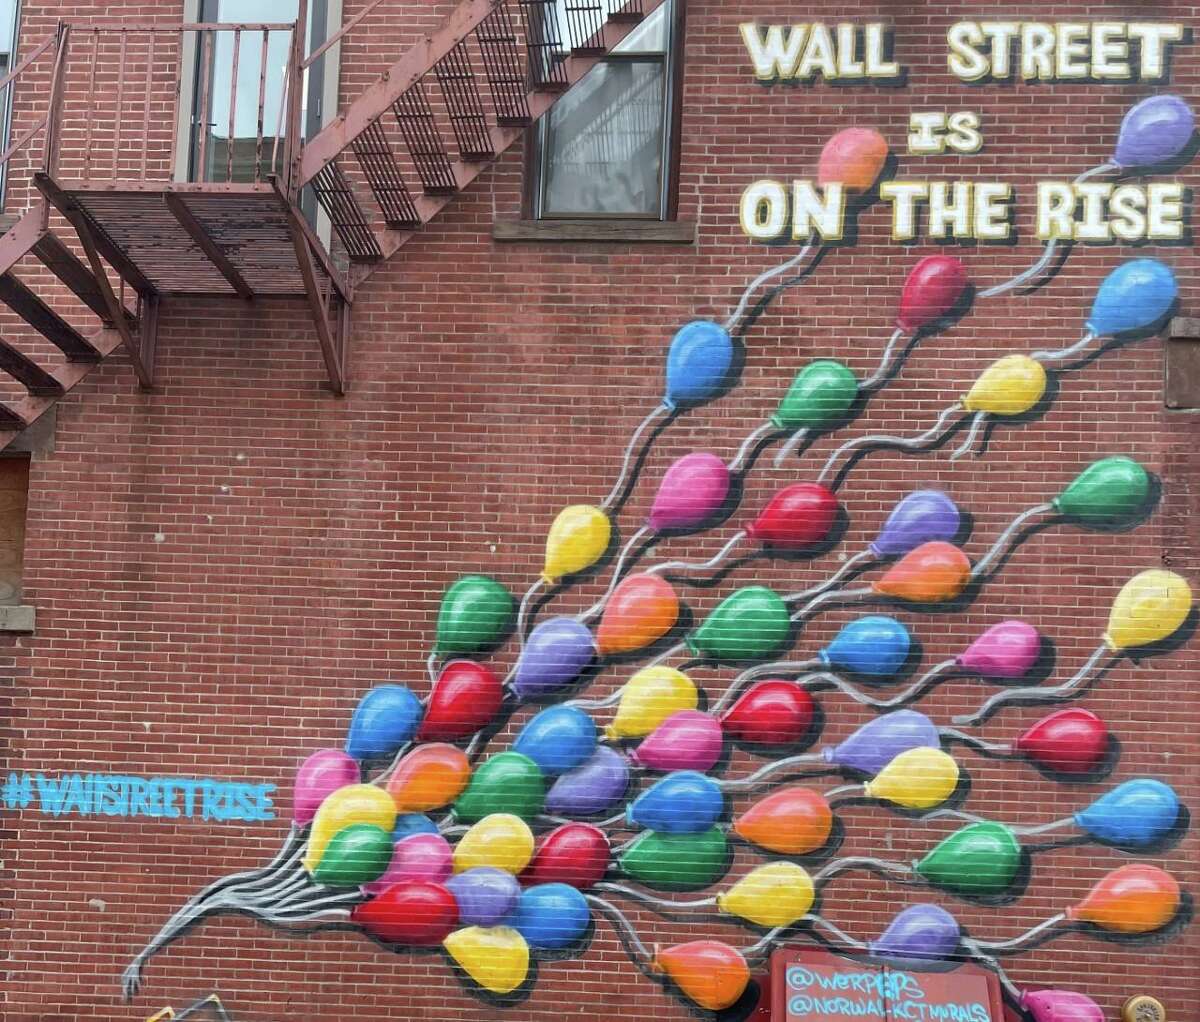 The Wall Street Design Kick-off event at the Wall Street Theater in Norwalk will be held from 4-8 p.m. on Tuesday, June 14.